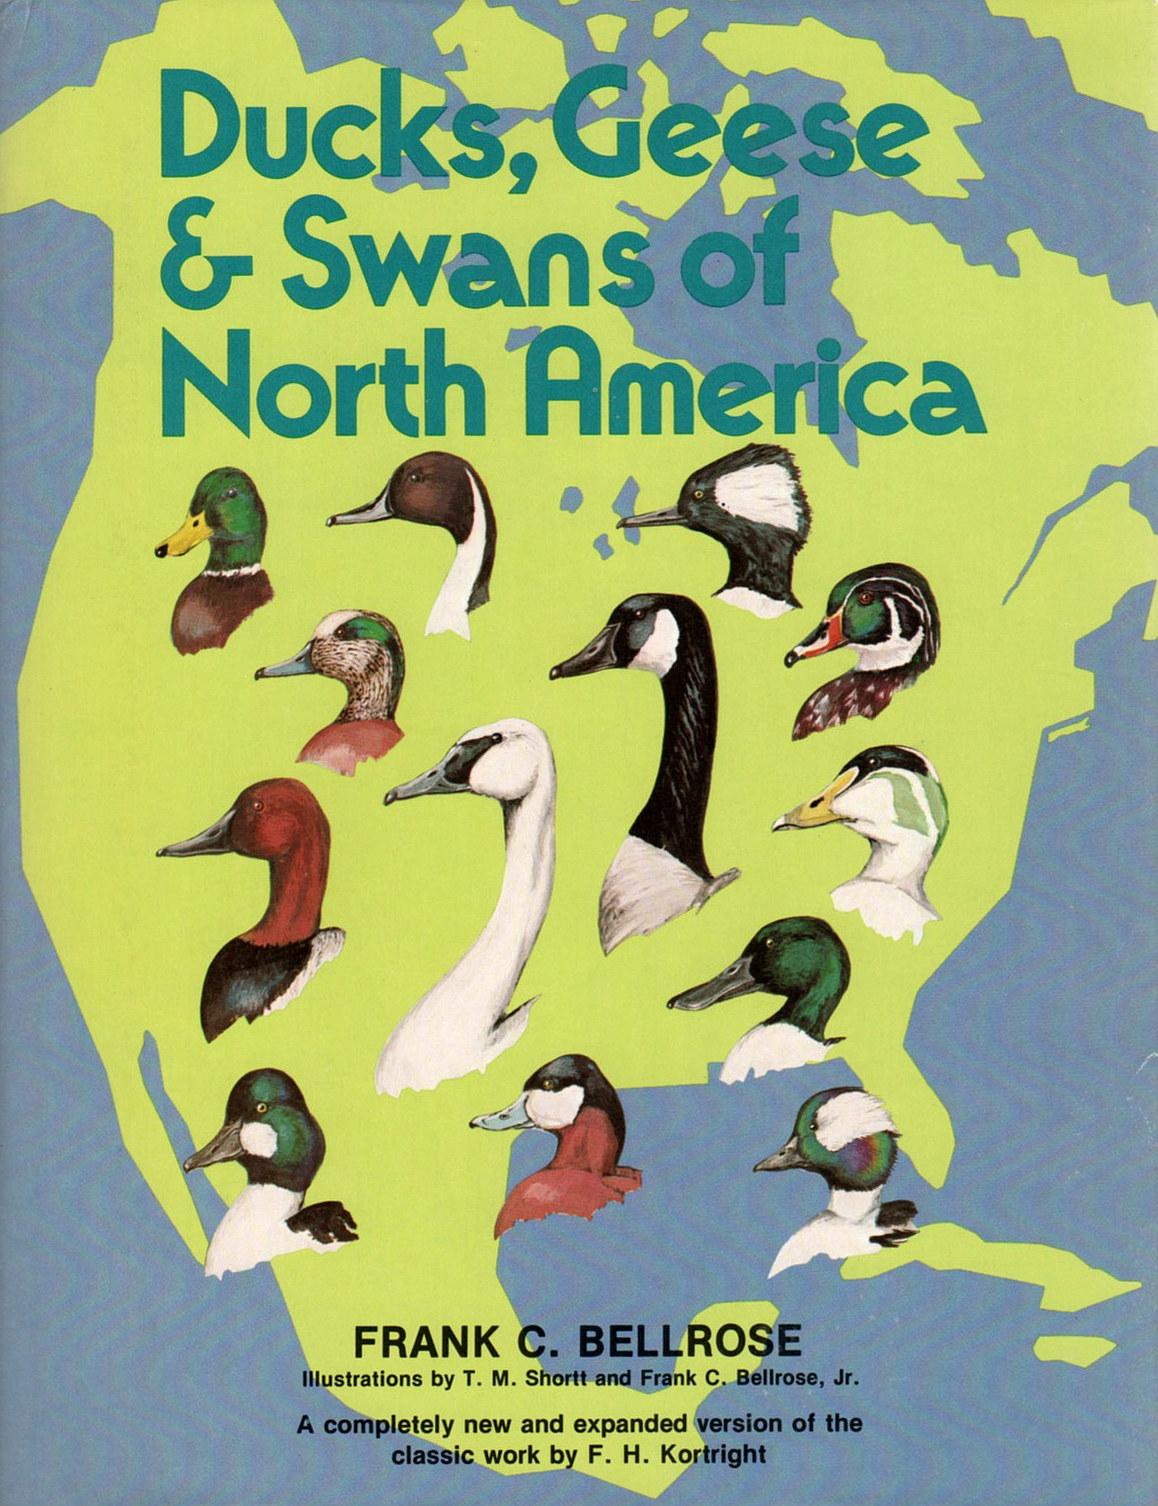 Ducks, Geese and Swans of North America (Frank Bellrose)